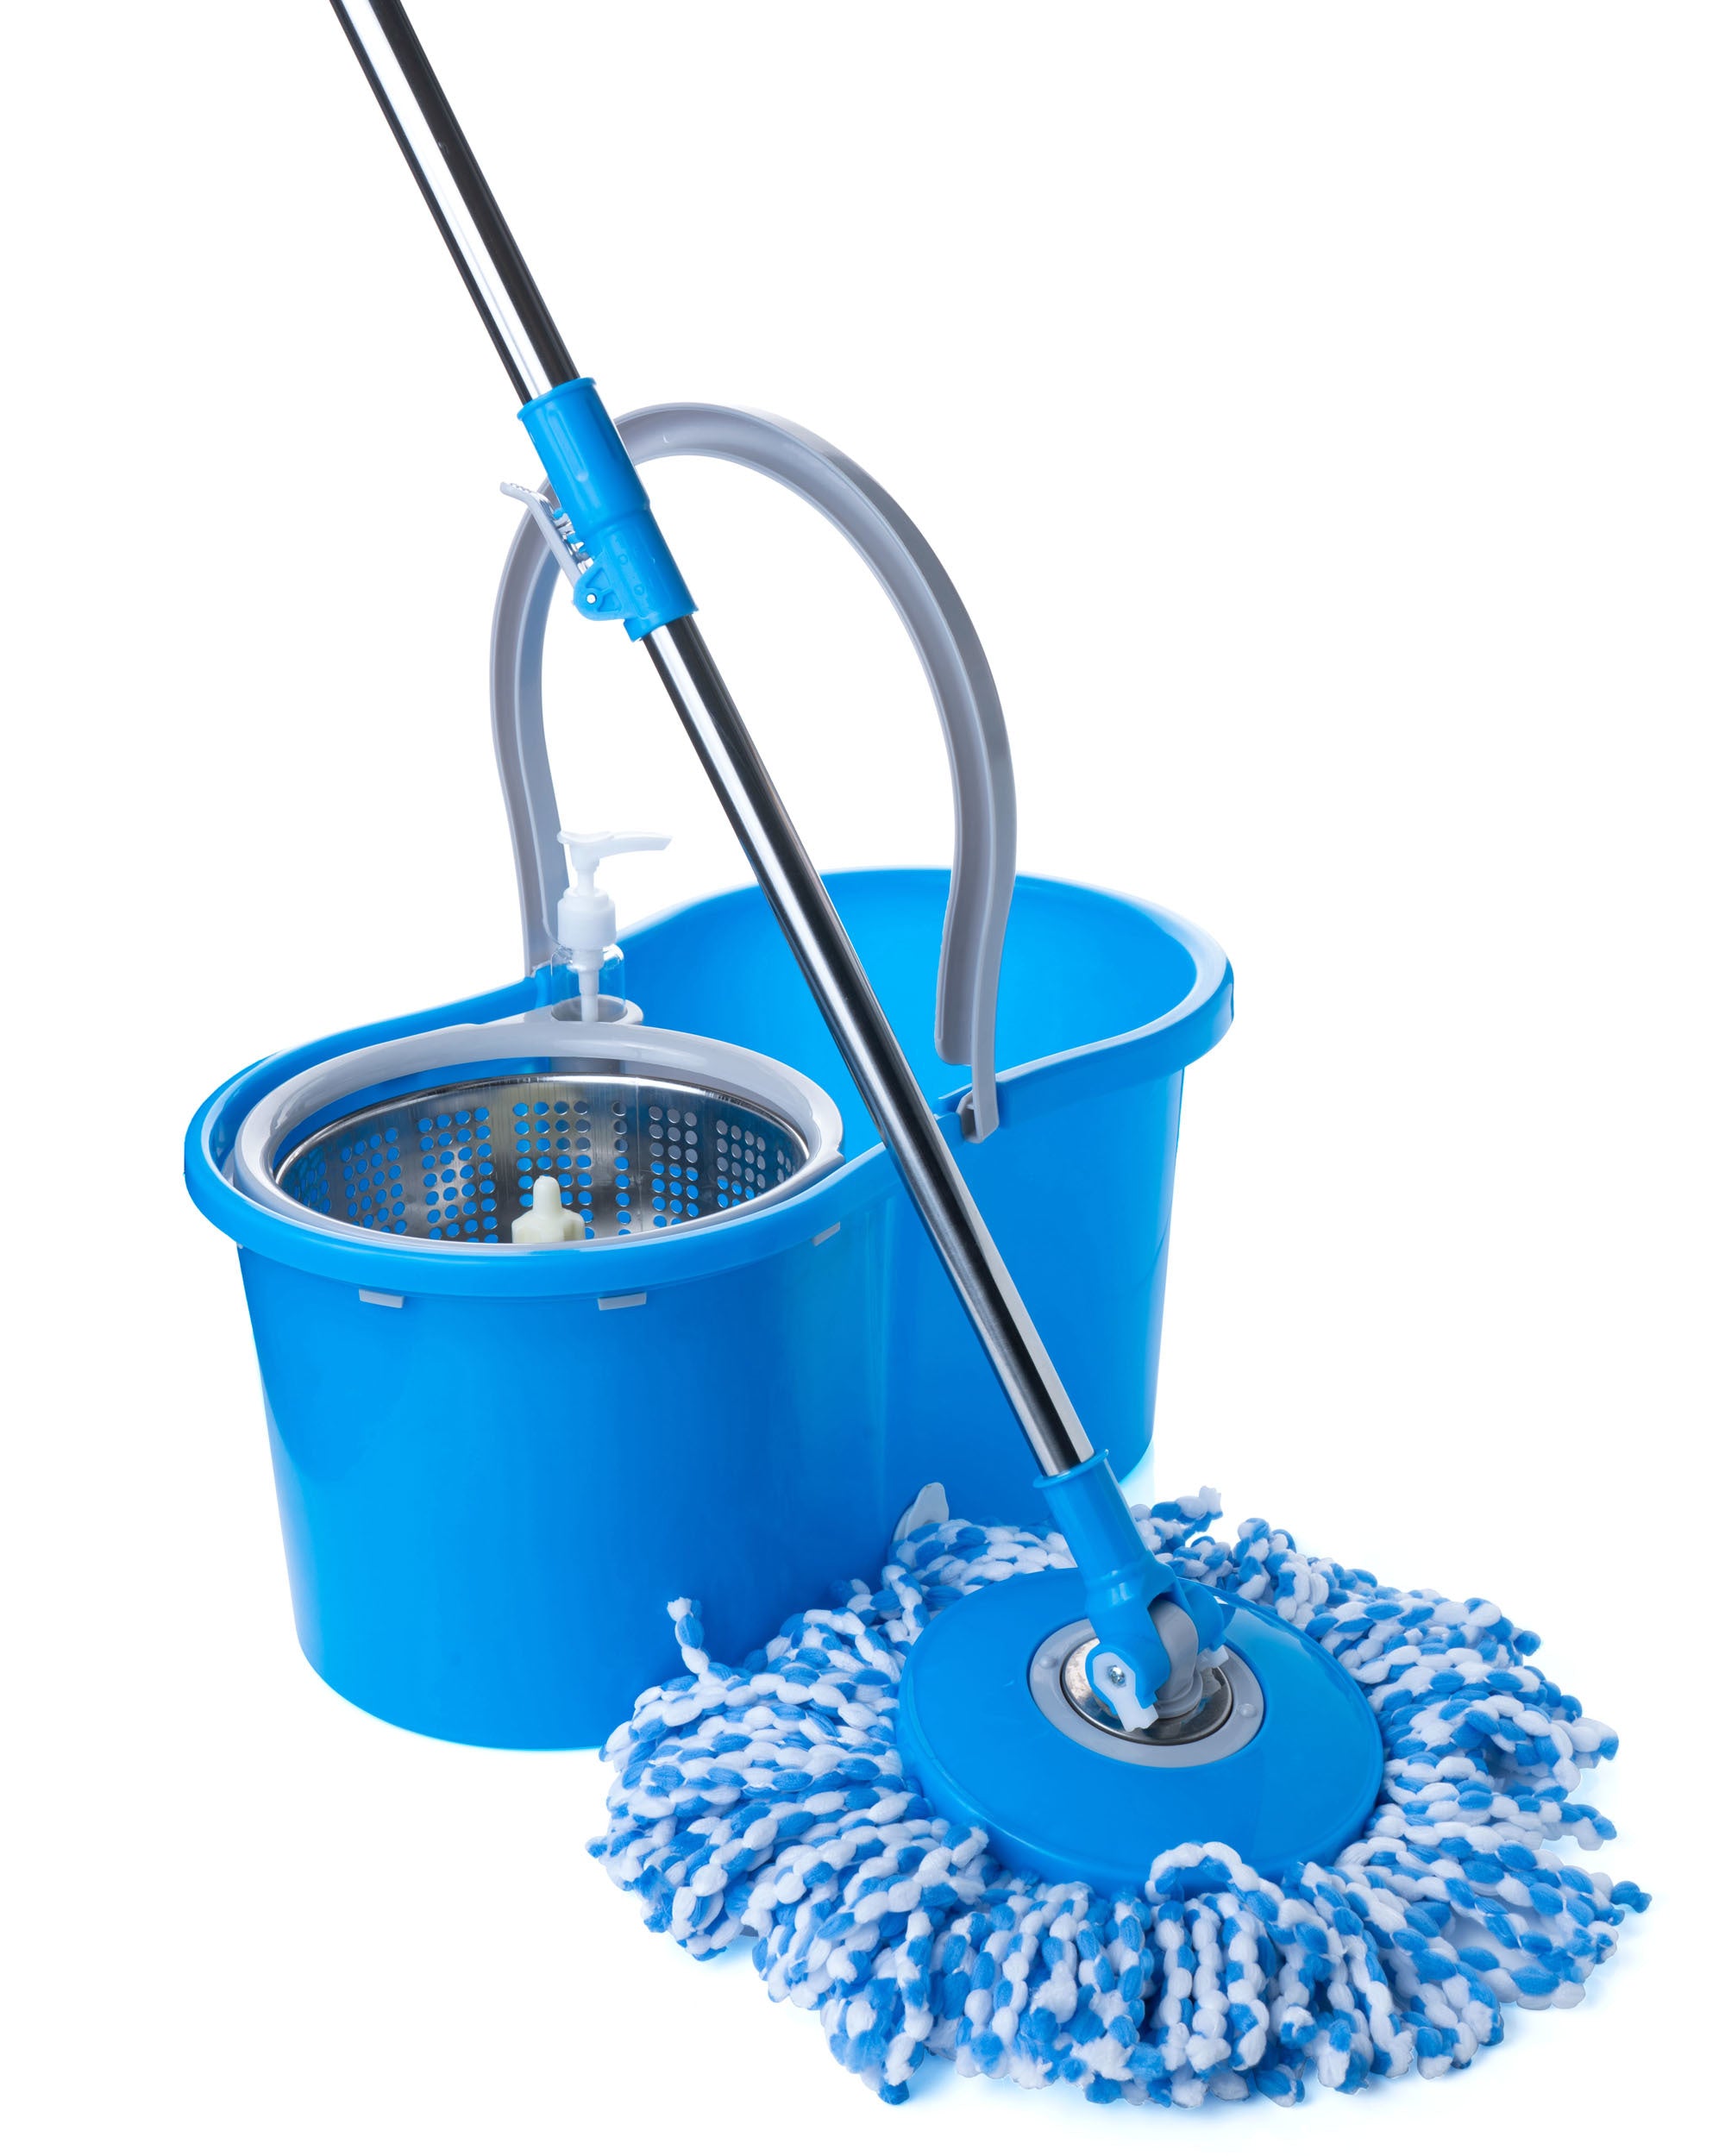 360 Mop with Mop Heads Included - The Clean Store